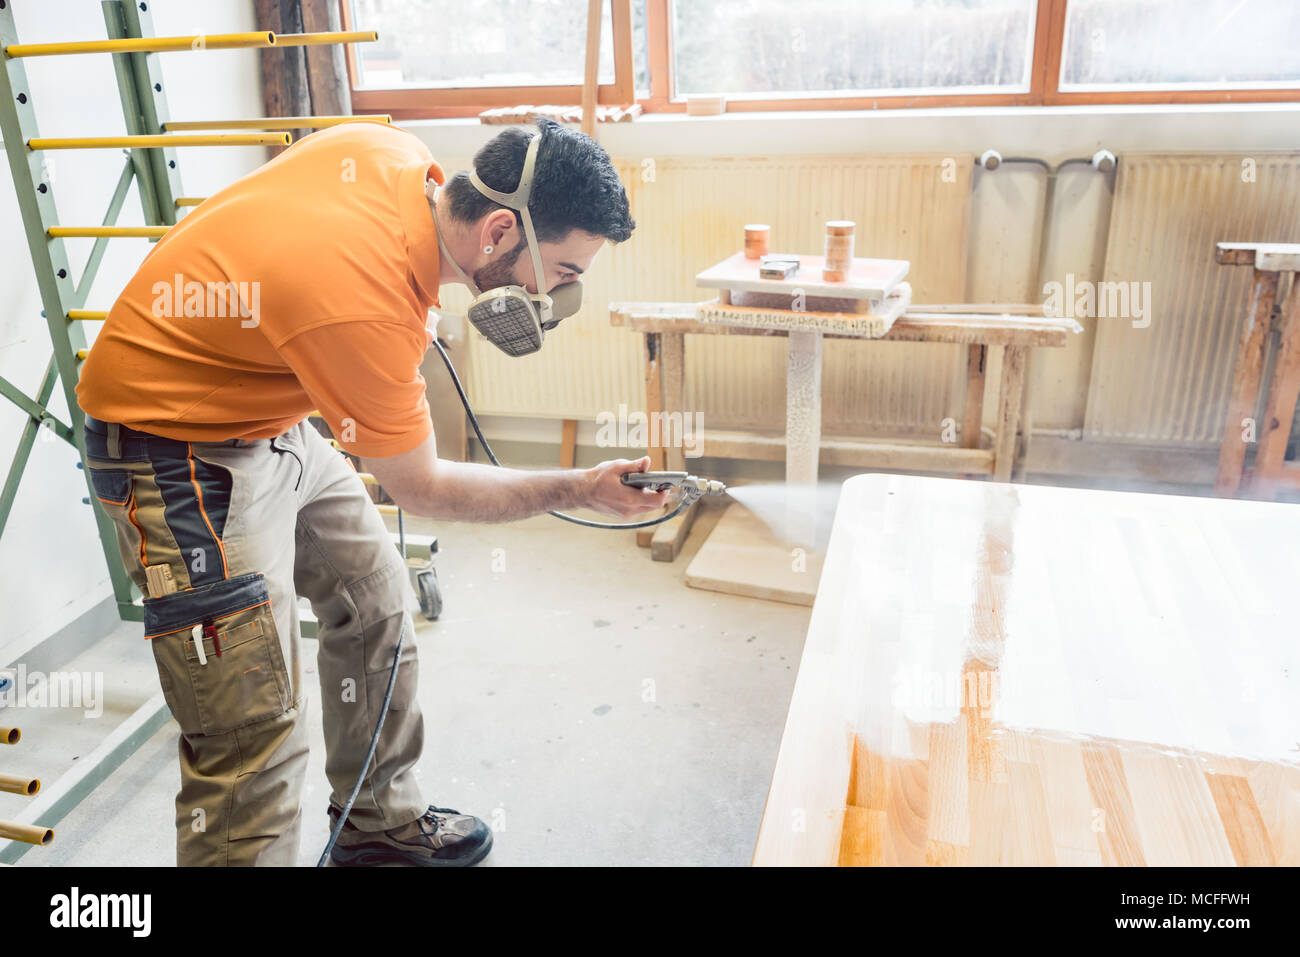 carpenter man spraying varnish on a table he works on Stock Photo